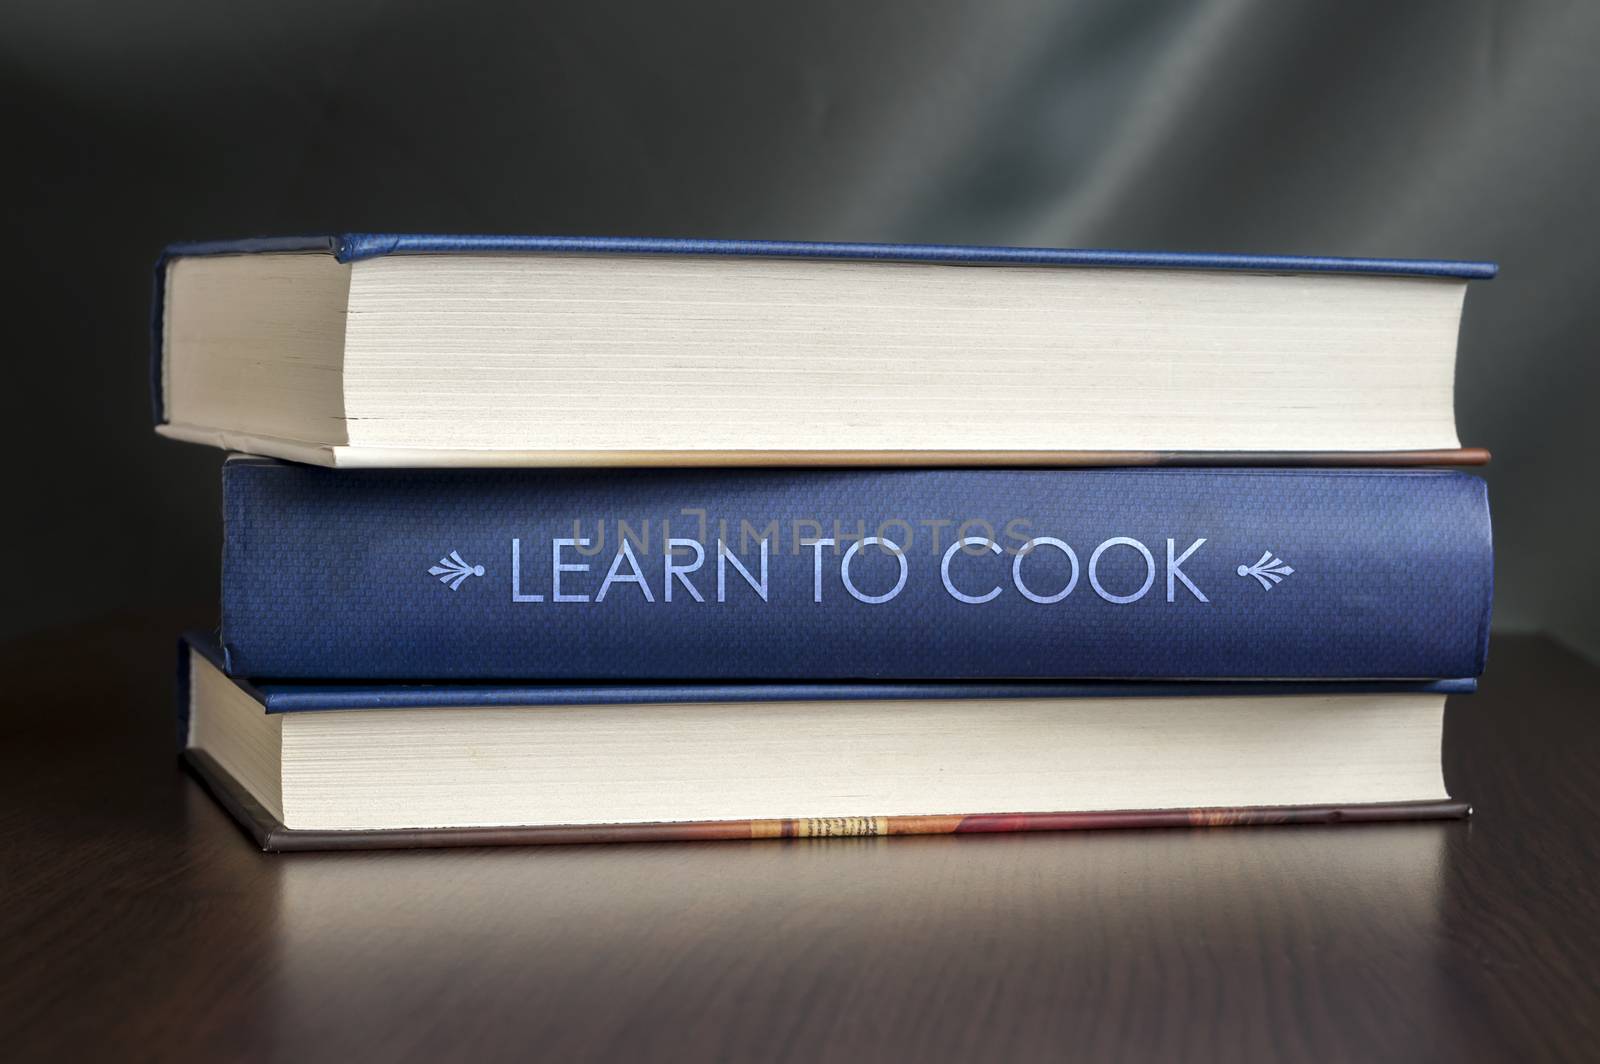 Books on a table and one with "Learn to cook" cover. Book concept.